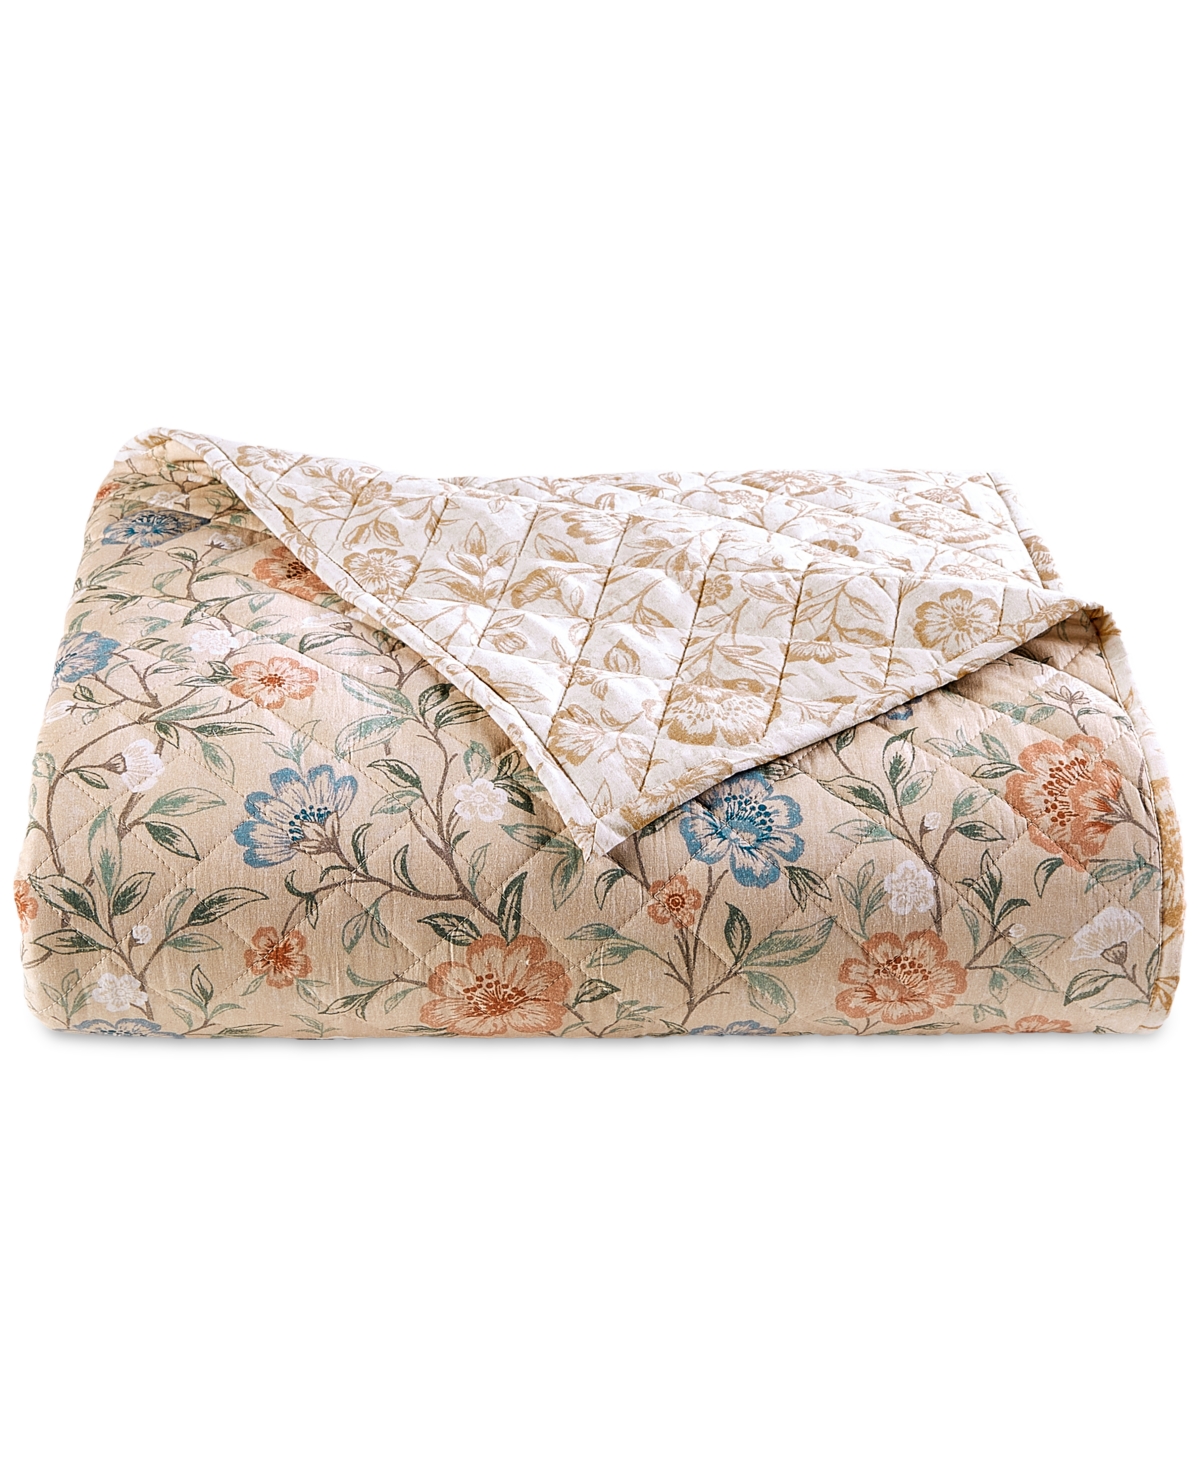 Shop Charter Club Garden Floral Quilt, Full/queen, Created For Macy's In Tan